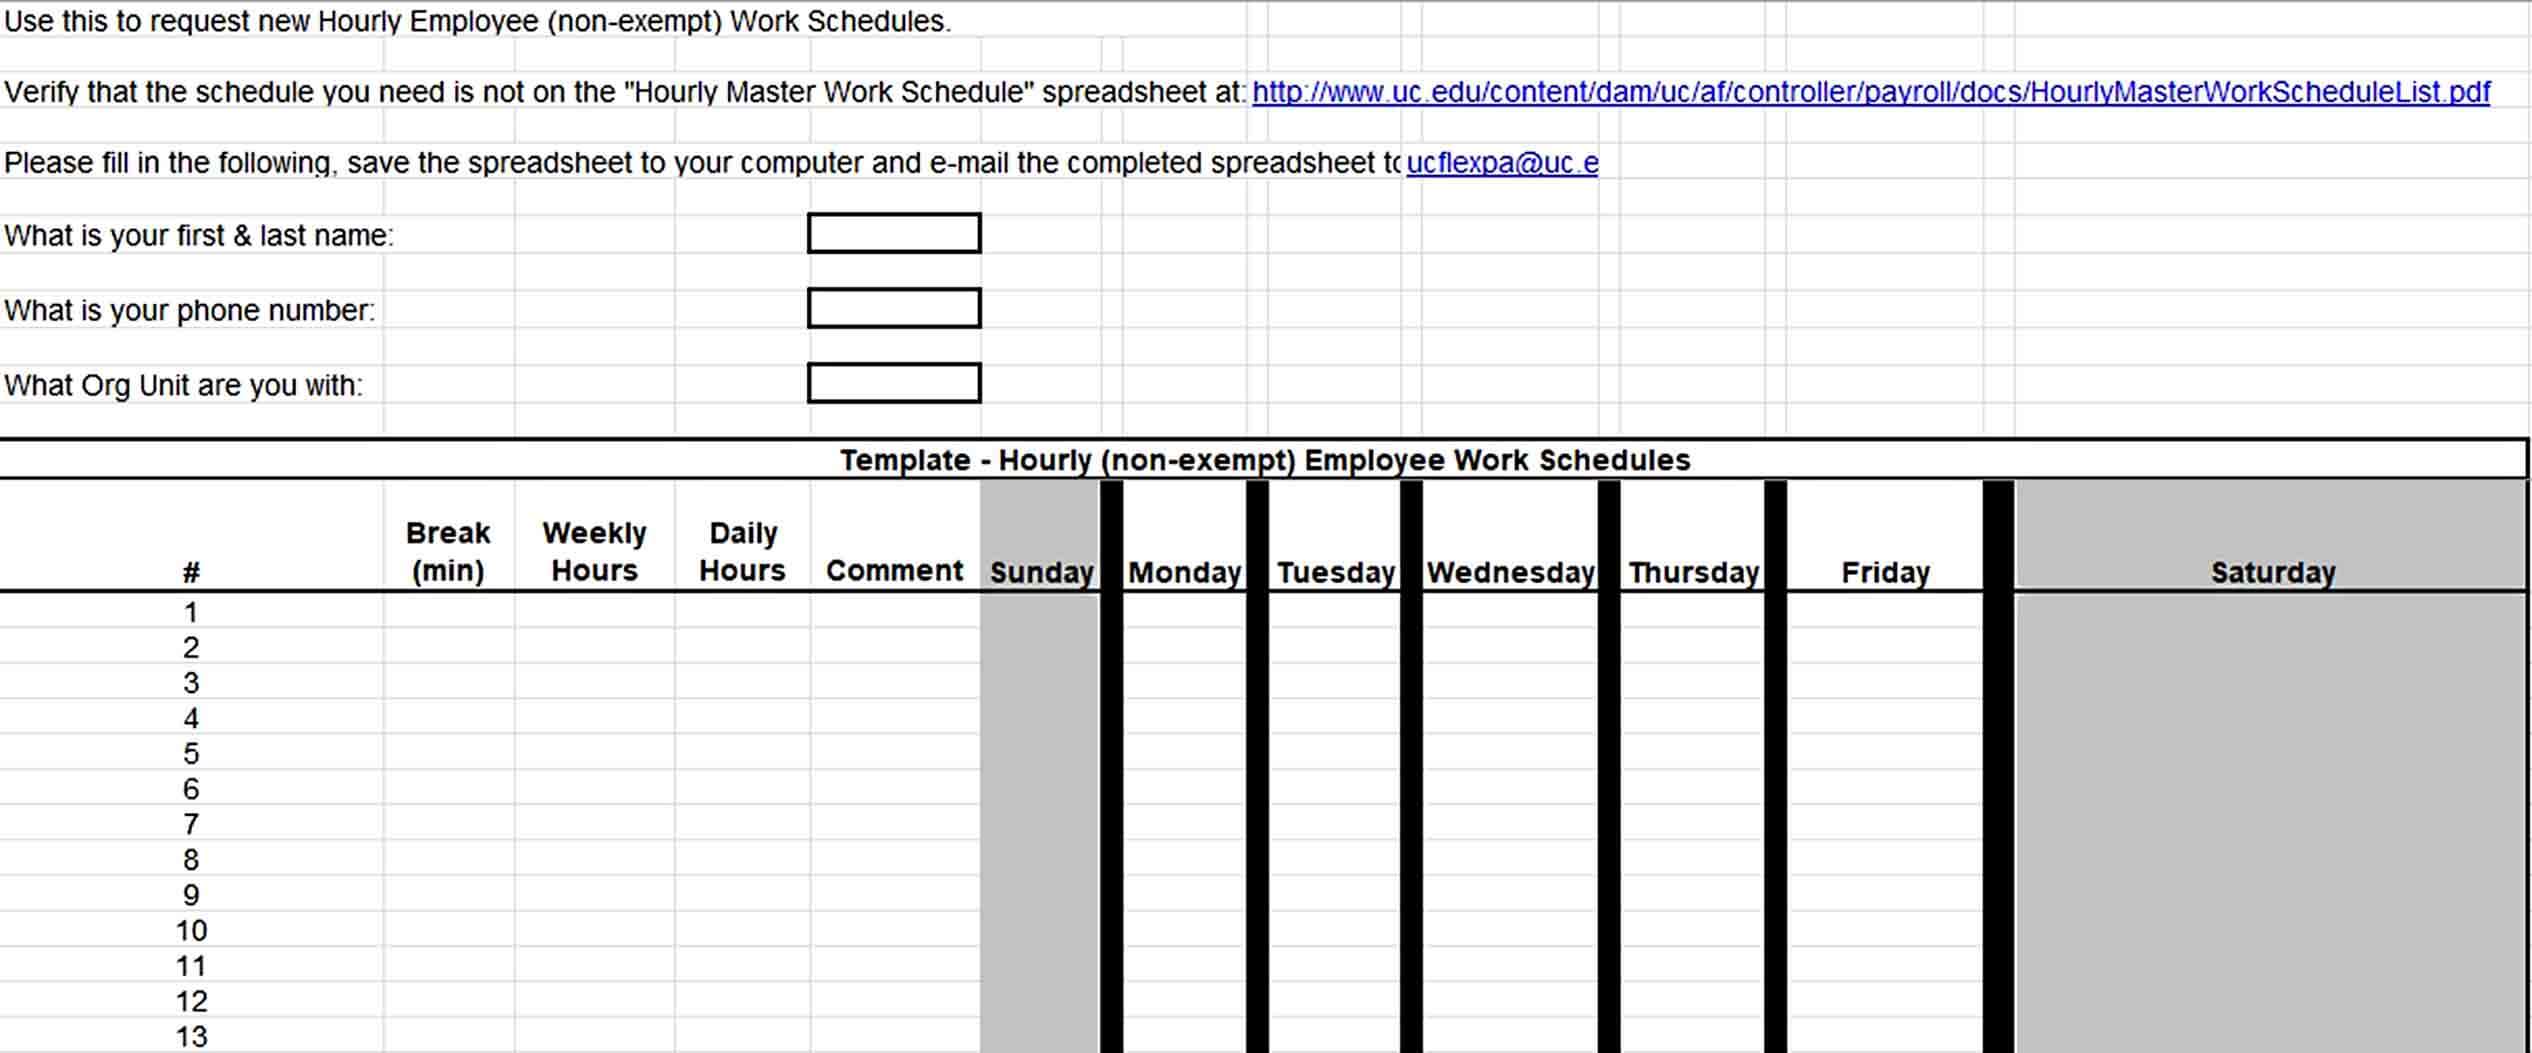 Employee Hourly Work Schedules Request Template